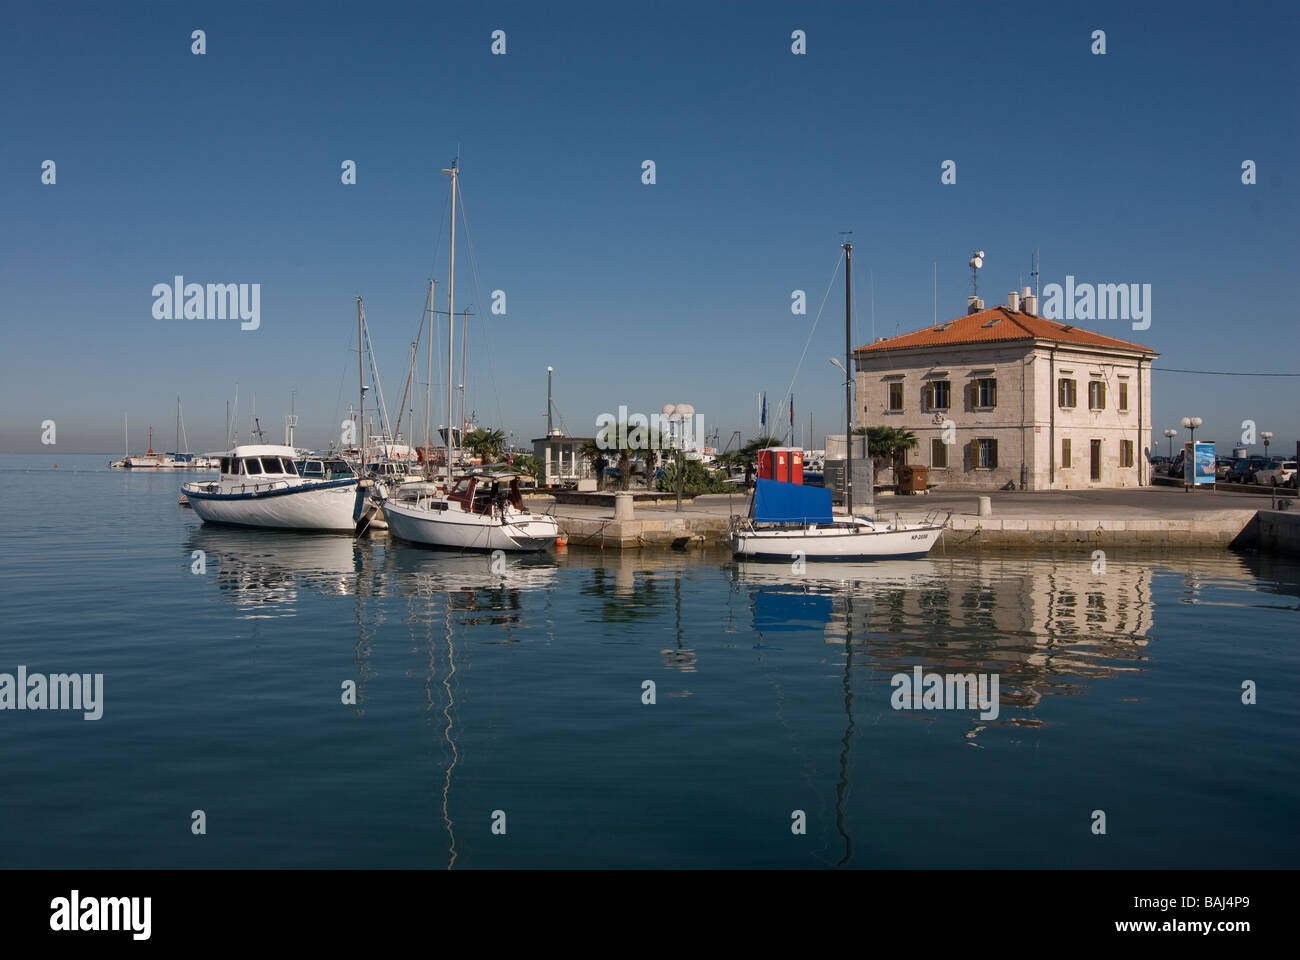 Harbor of Koper with boats and a hut Slovenia Eastern Europe Stock Photo